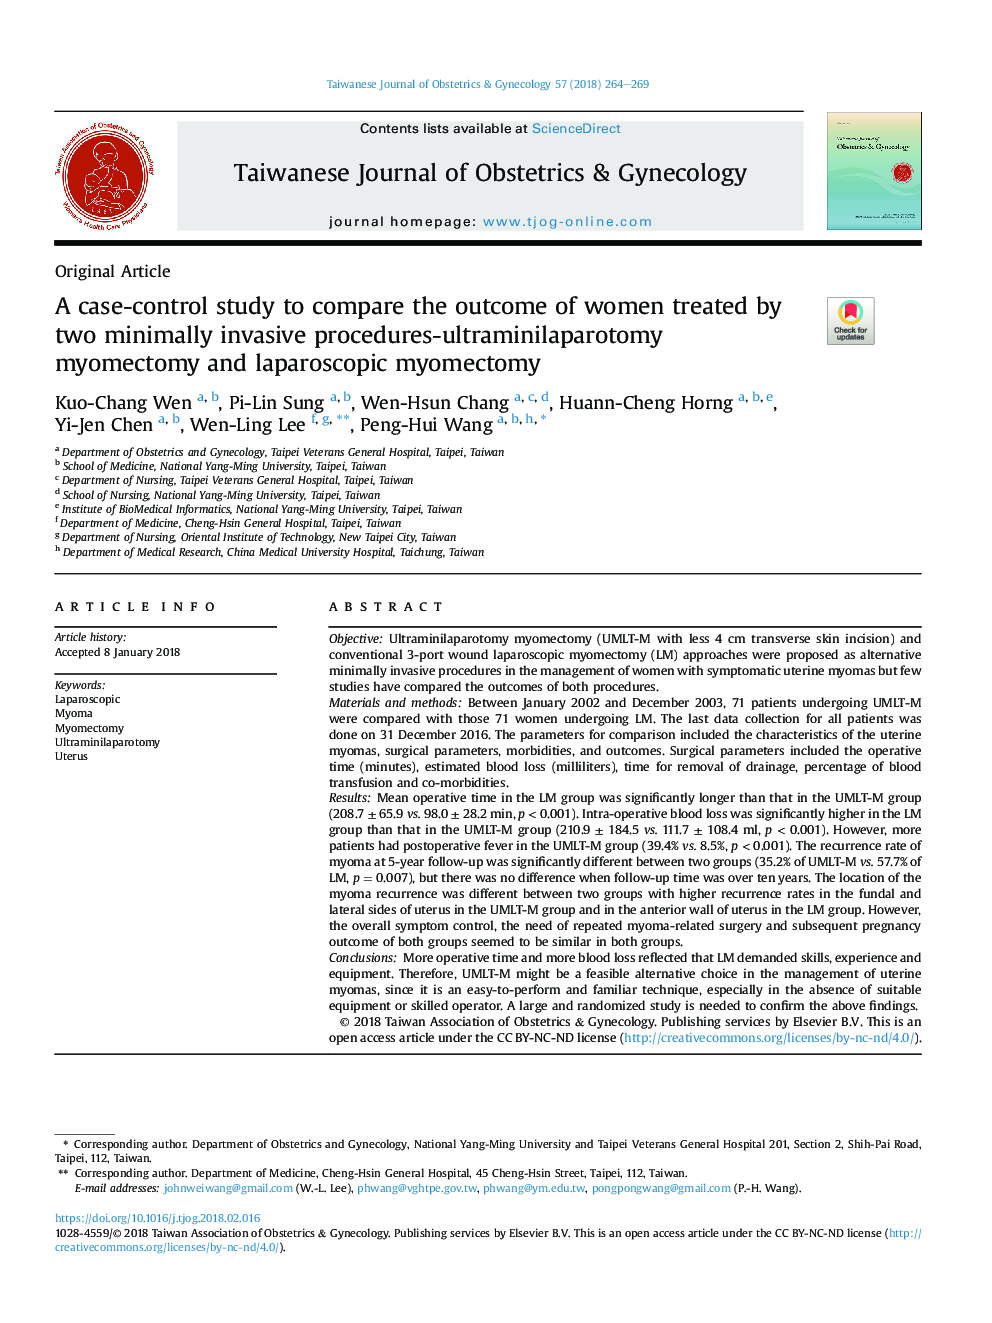 A case-control study to compare the outcome of women treated by two minimally invasive procedures-ultraminilaparotomy myomectomy and laparoscopic myomectomy